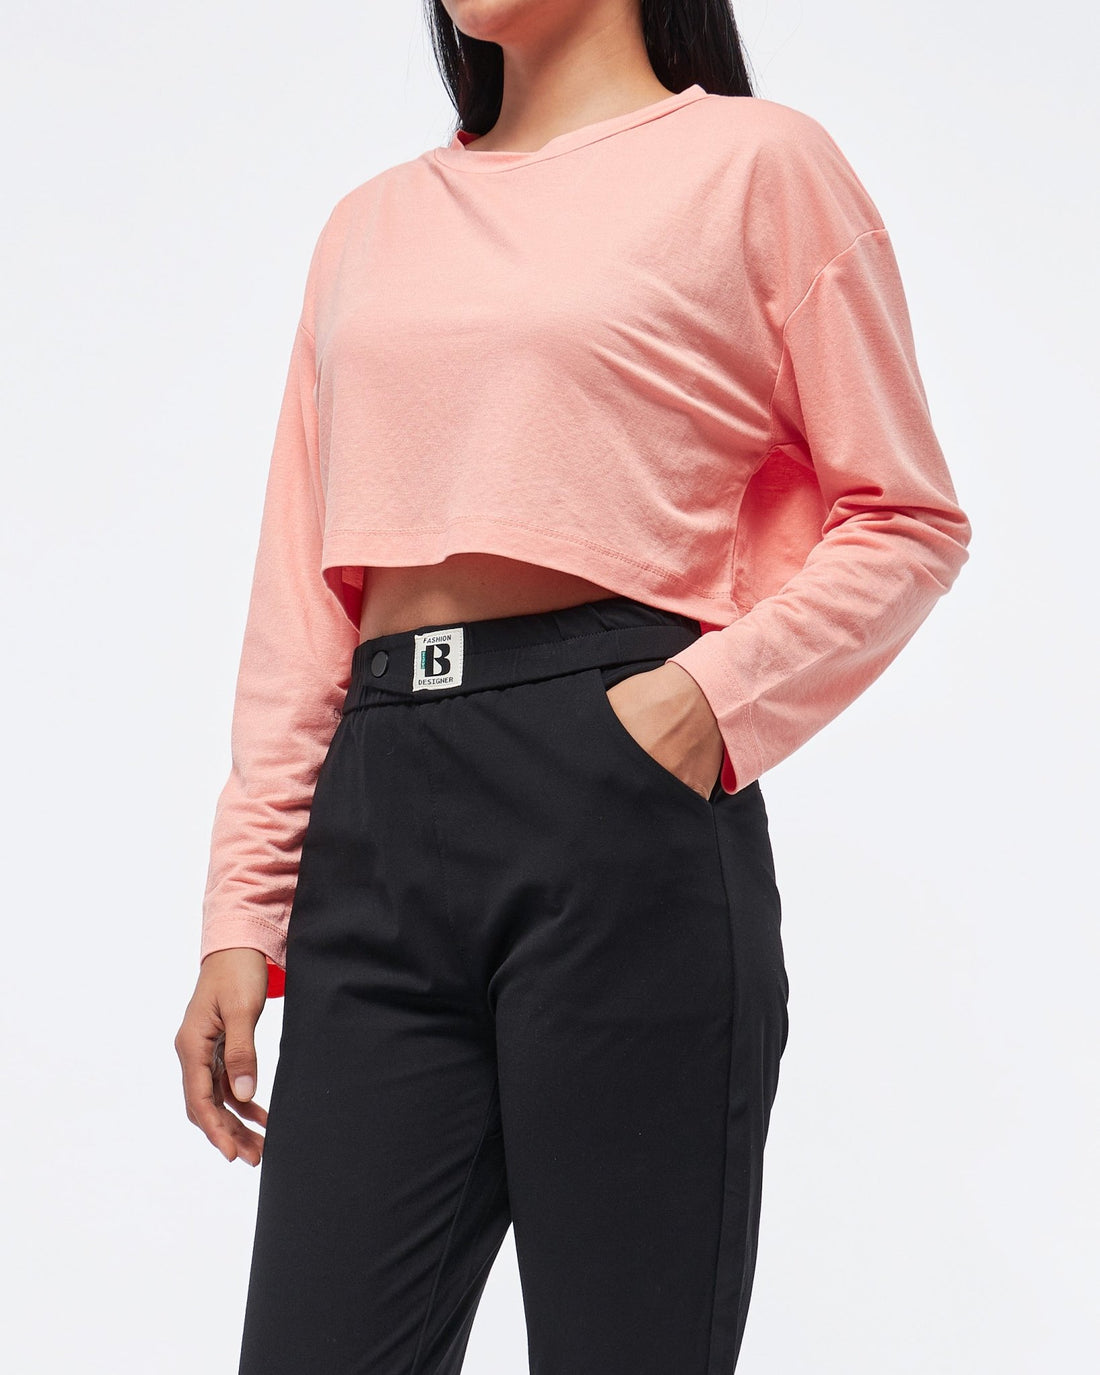 MOI OUTFIT-Candy Color Long Sleeve Lady Crop Top 12.90